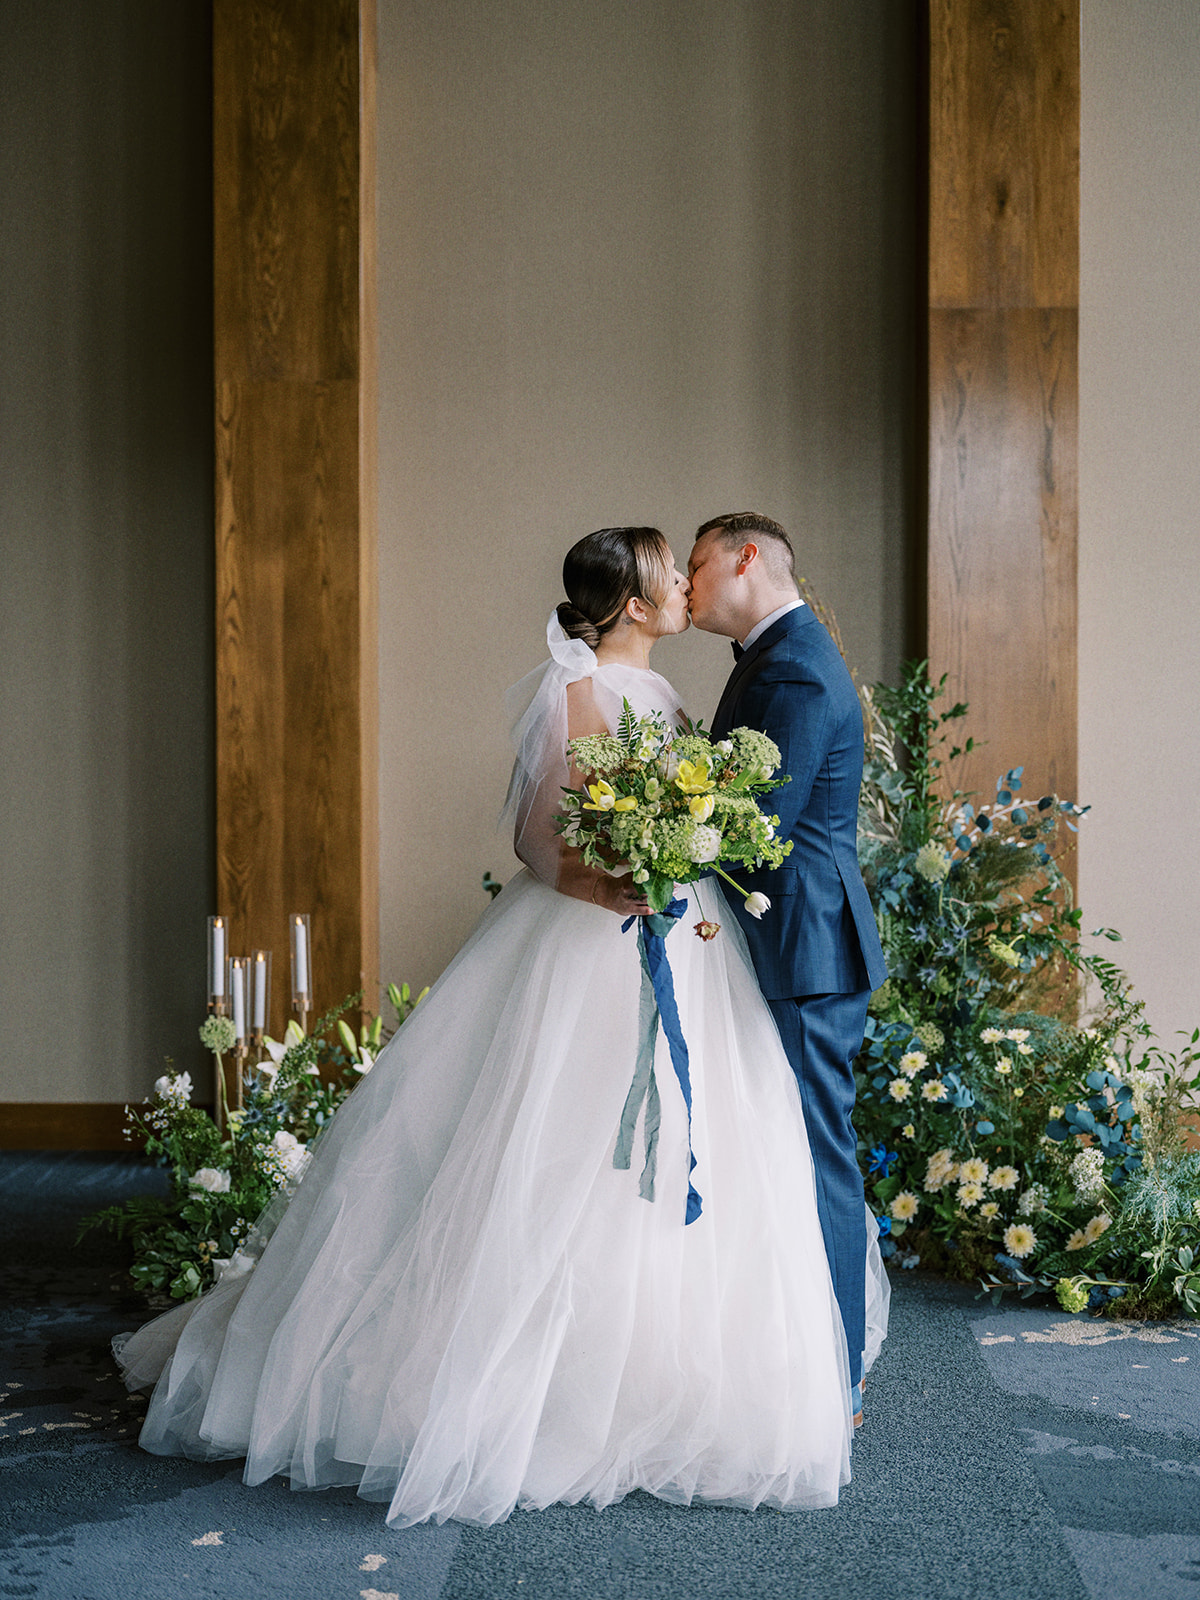 Contemporary and romantic wedding ceremony at The Malcolm Hotel in Canmore, Alberta;